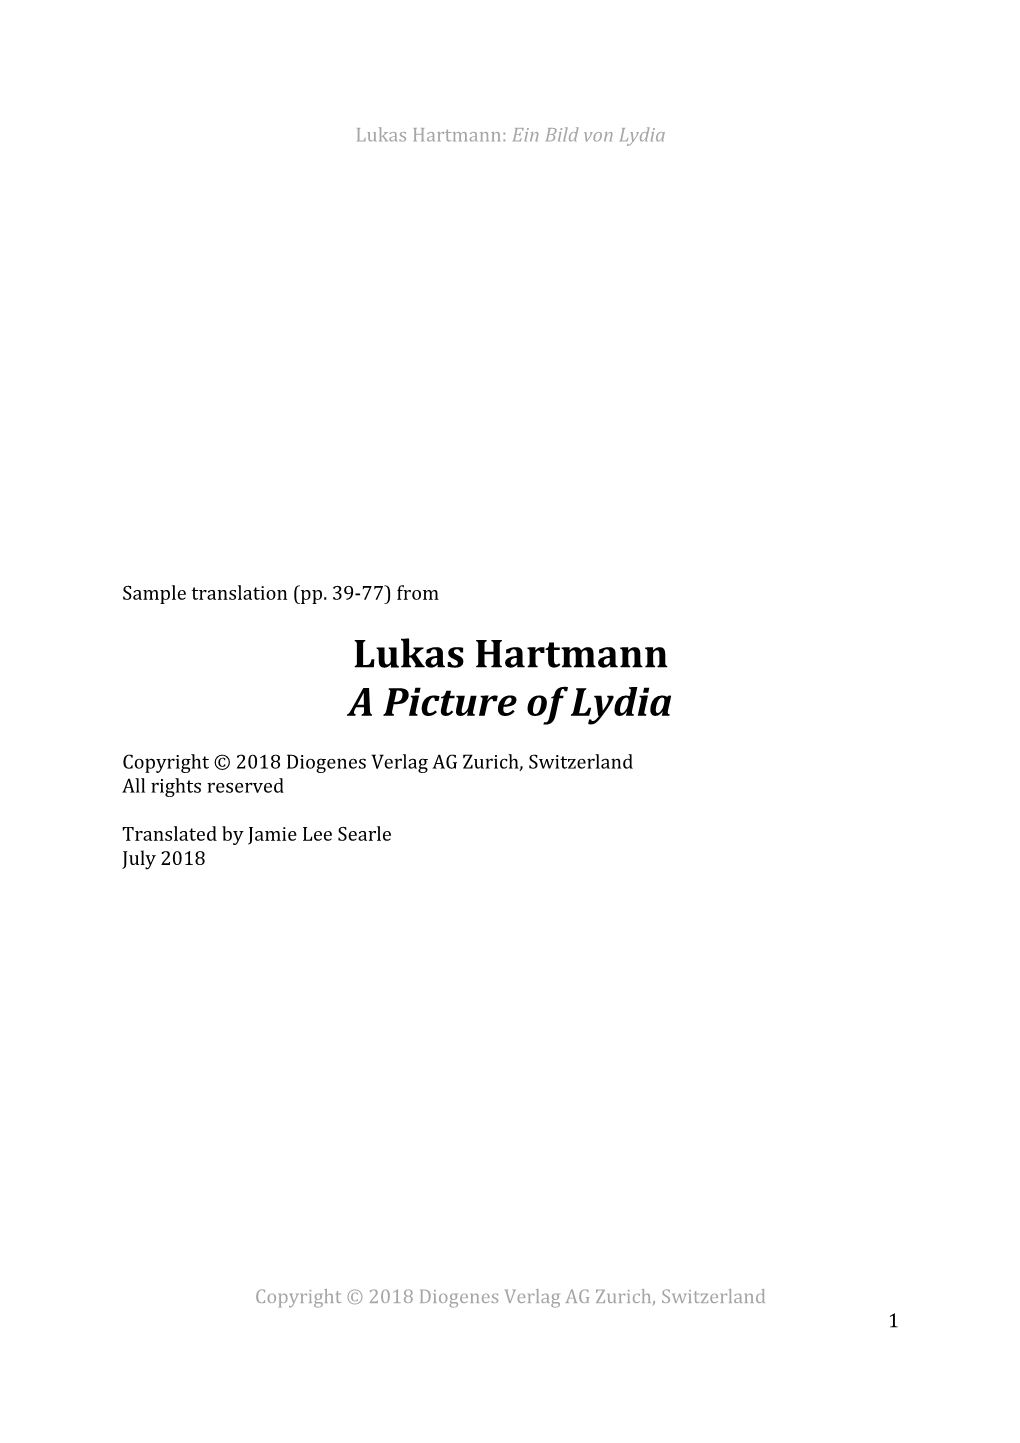 Lukas Hartmann a Picture of Lydia